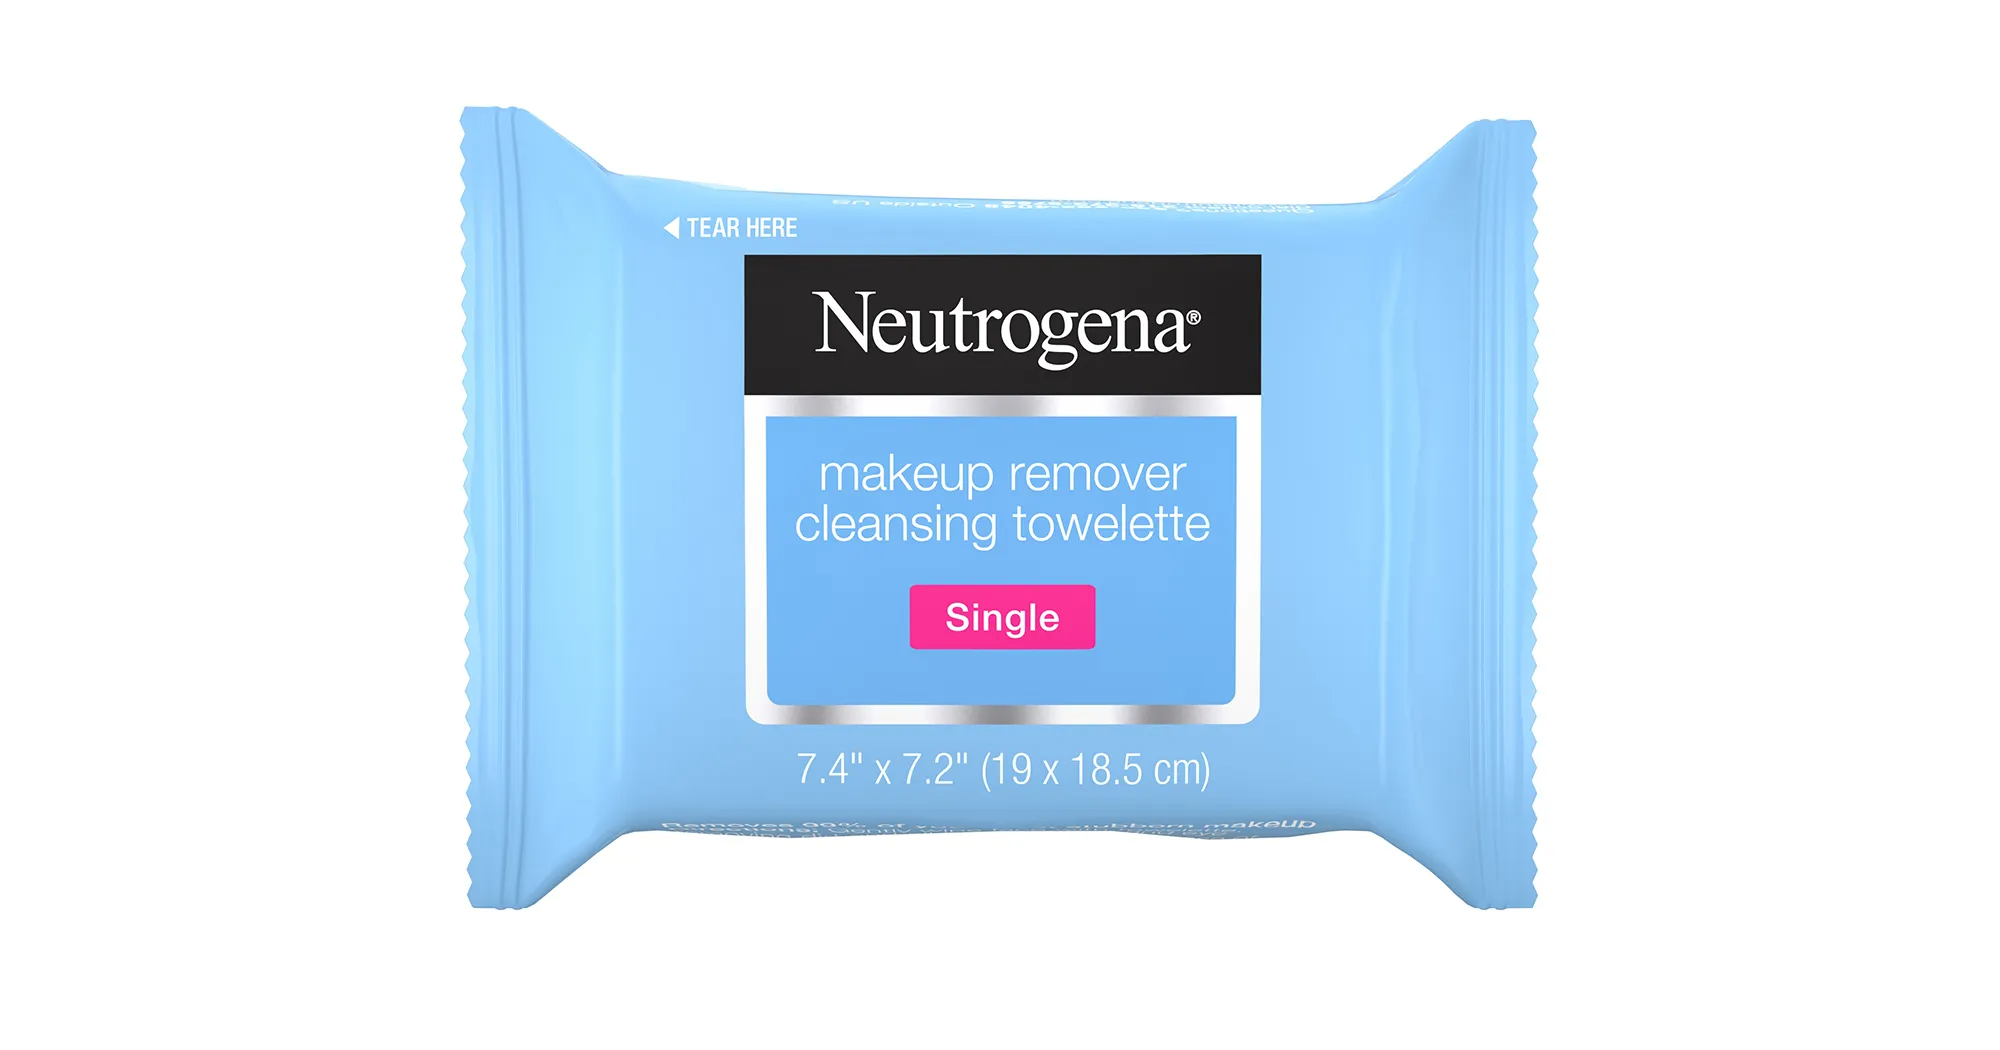 Neutrogena® Makeup Remover Cleansing Towelettes - Single Towel, makeup remover, London Loves Beauty